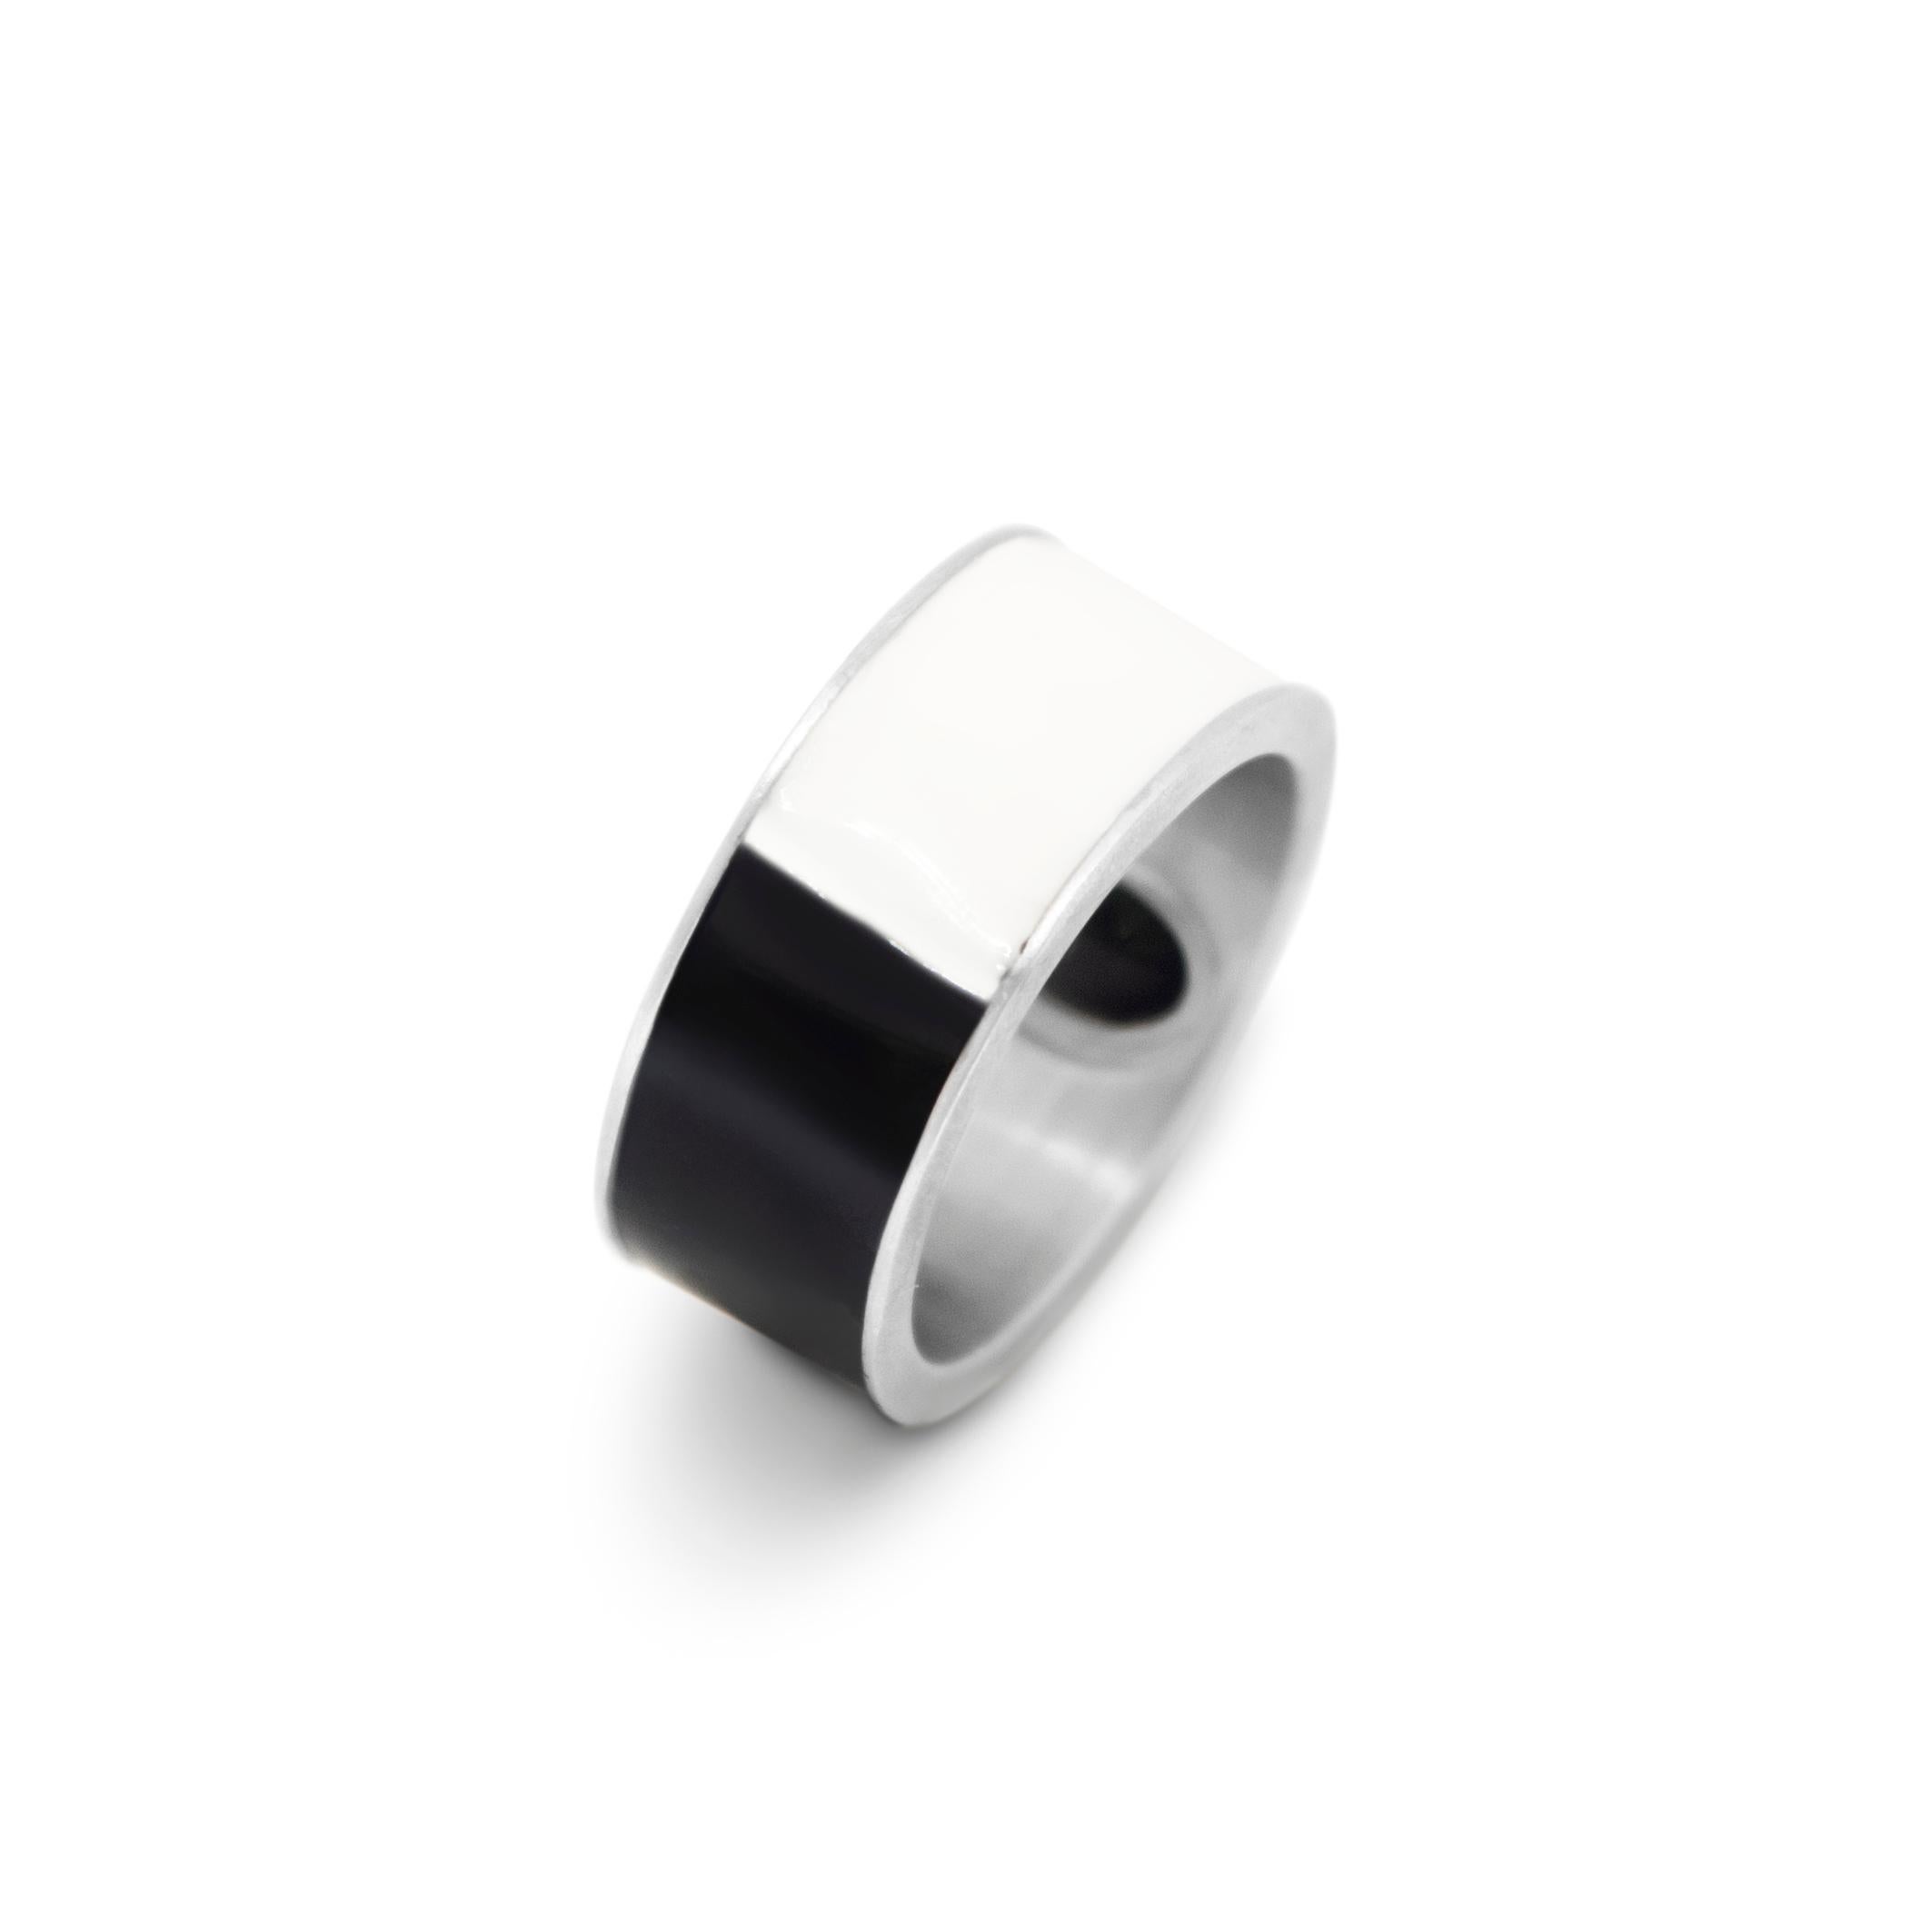 Unisex band ring in satin sterling silver, black and white enamel, set with black onyx cabochon. A geometric, minimalistic, androgynous, piece with healing properties. The black onyx is a powerful stone that releases negativity from a person by